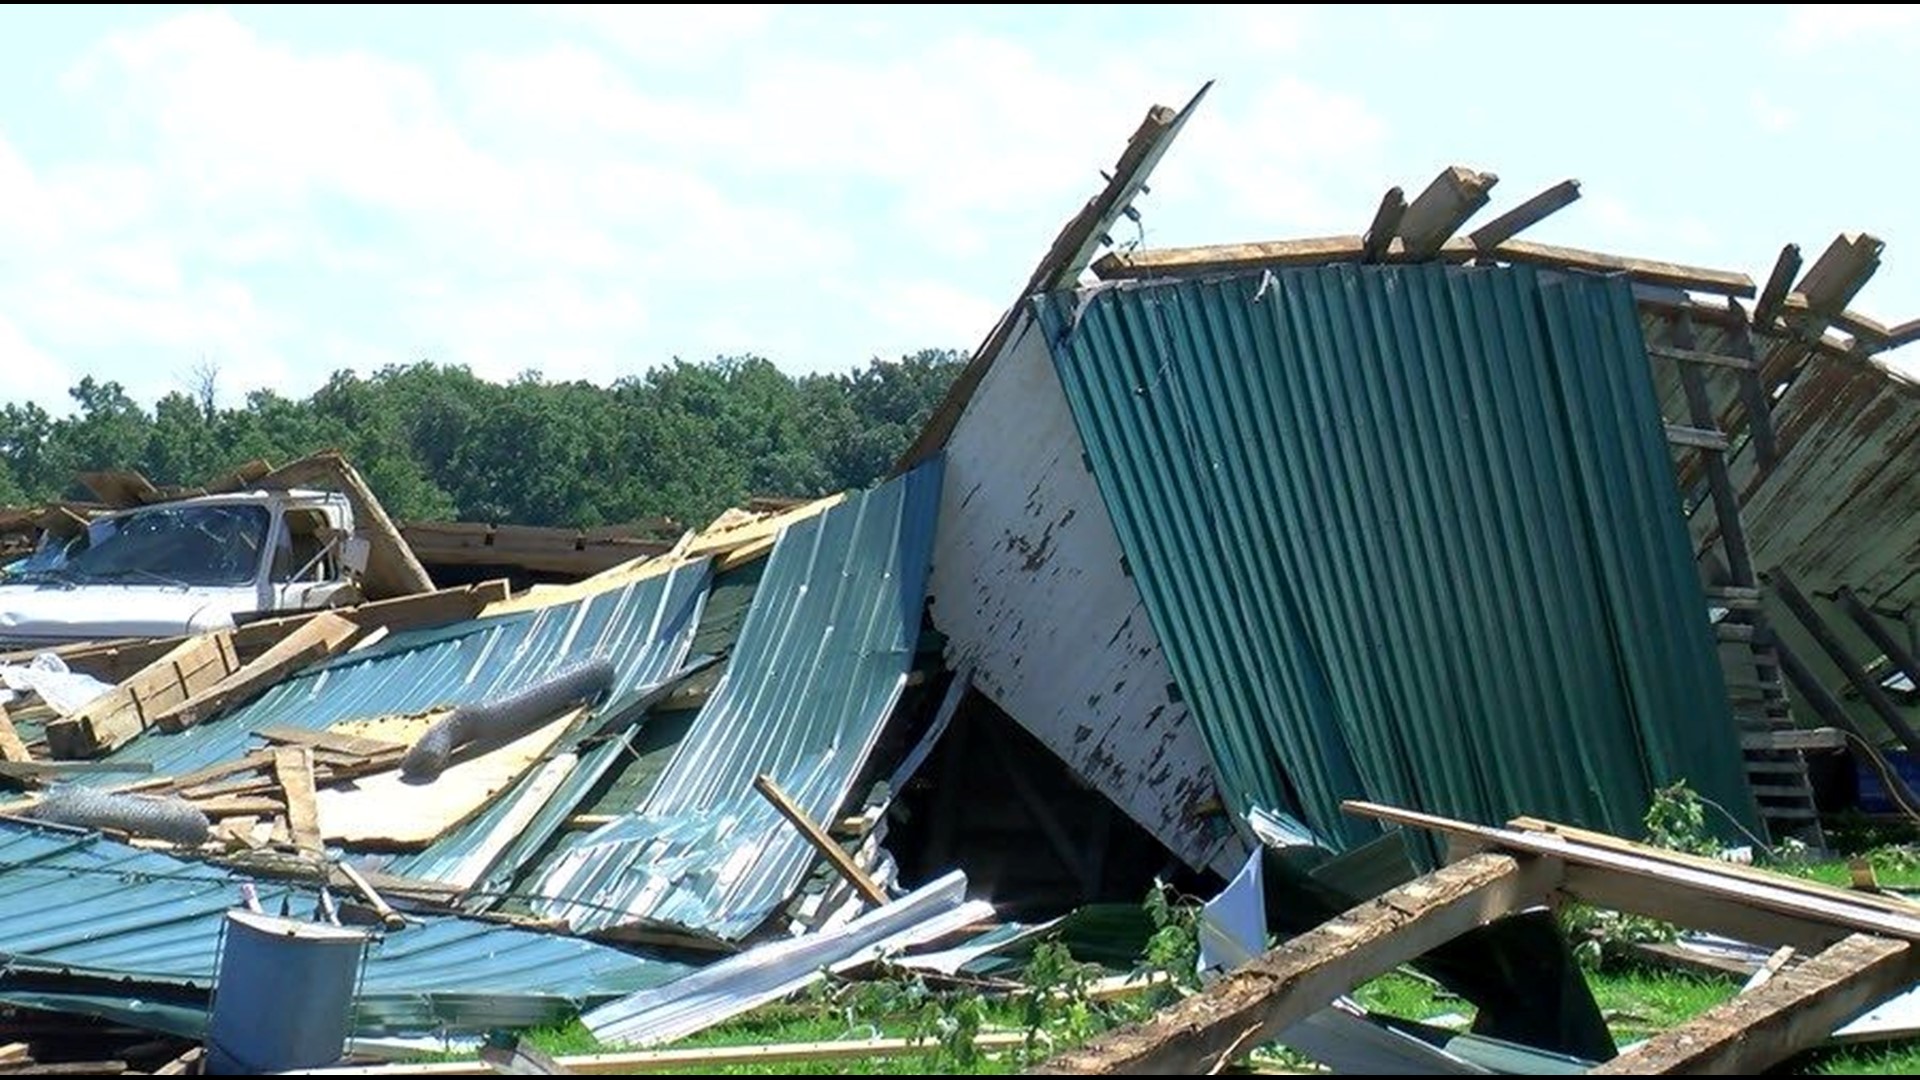 Cleanup continues in Defiance after Wednesday tornado